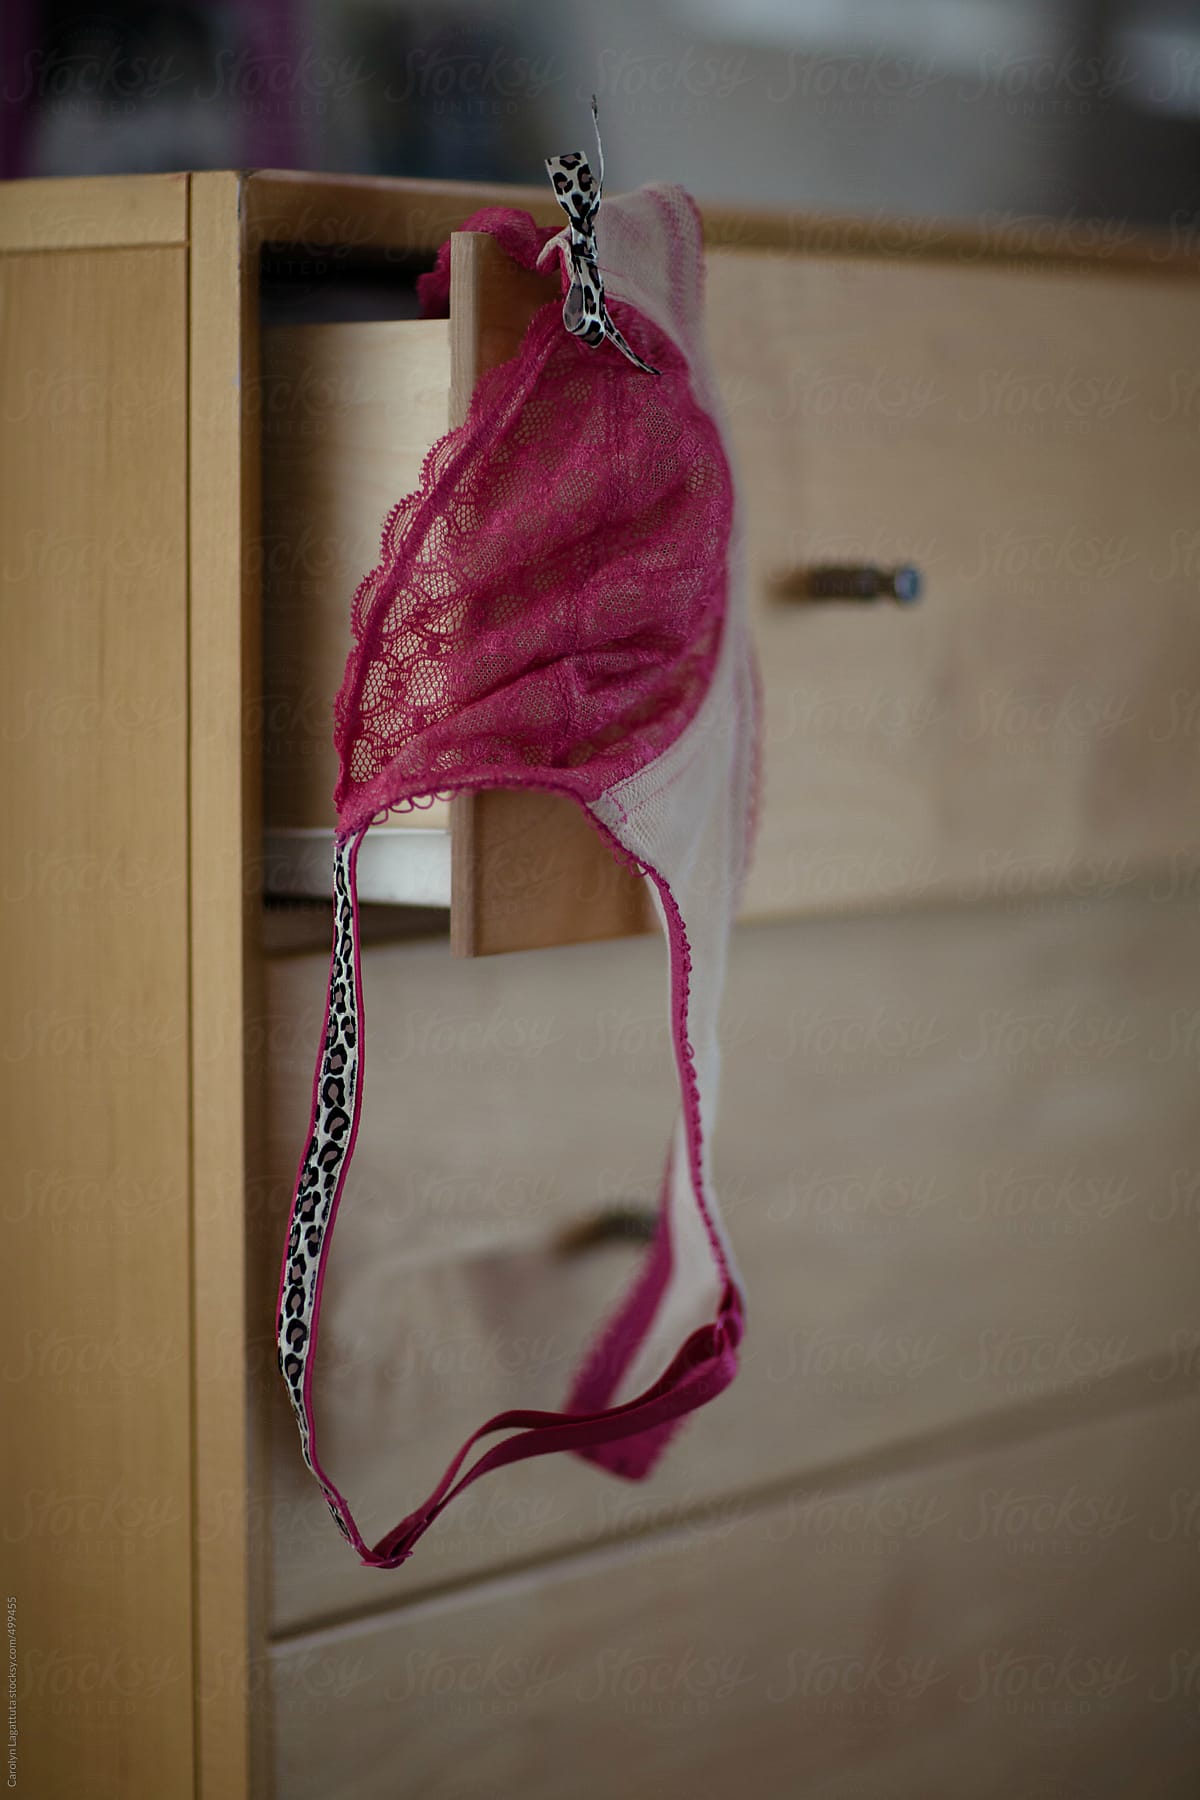 Pink lace bra hanging out of the top drawer of the dresser